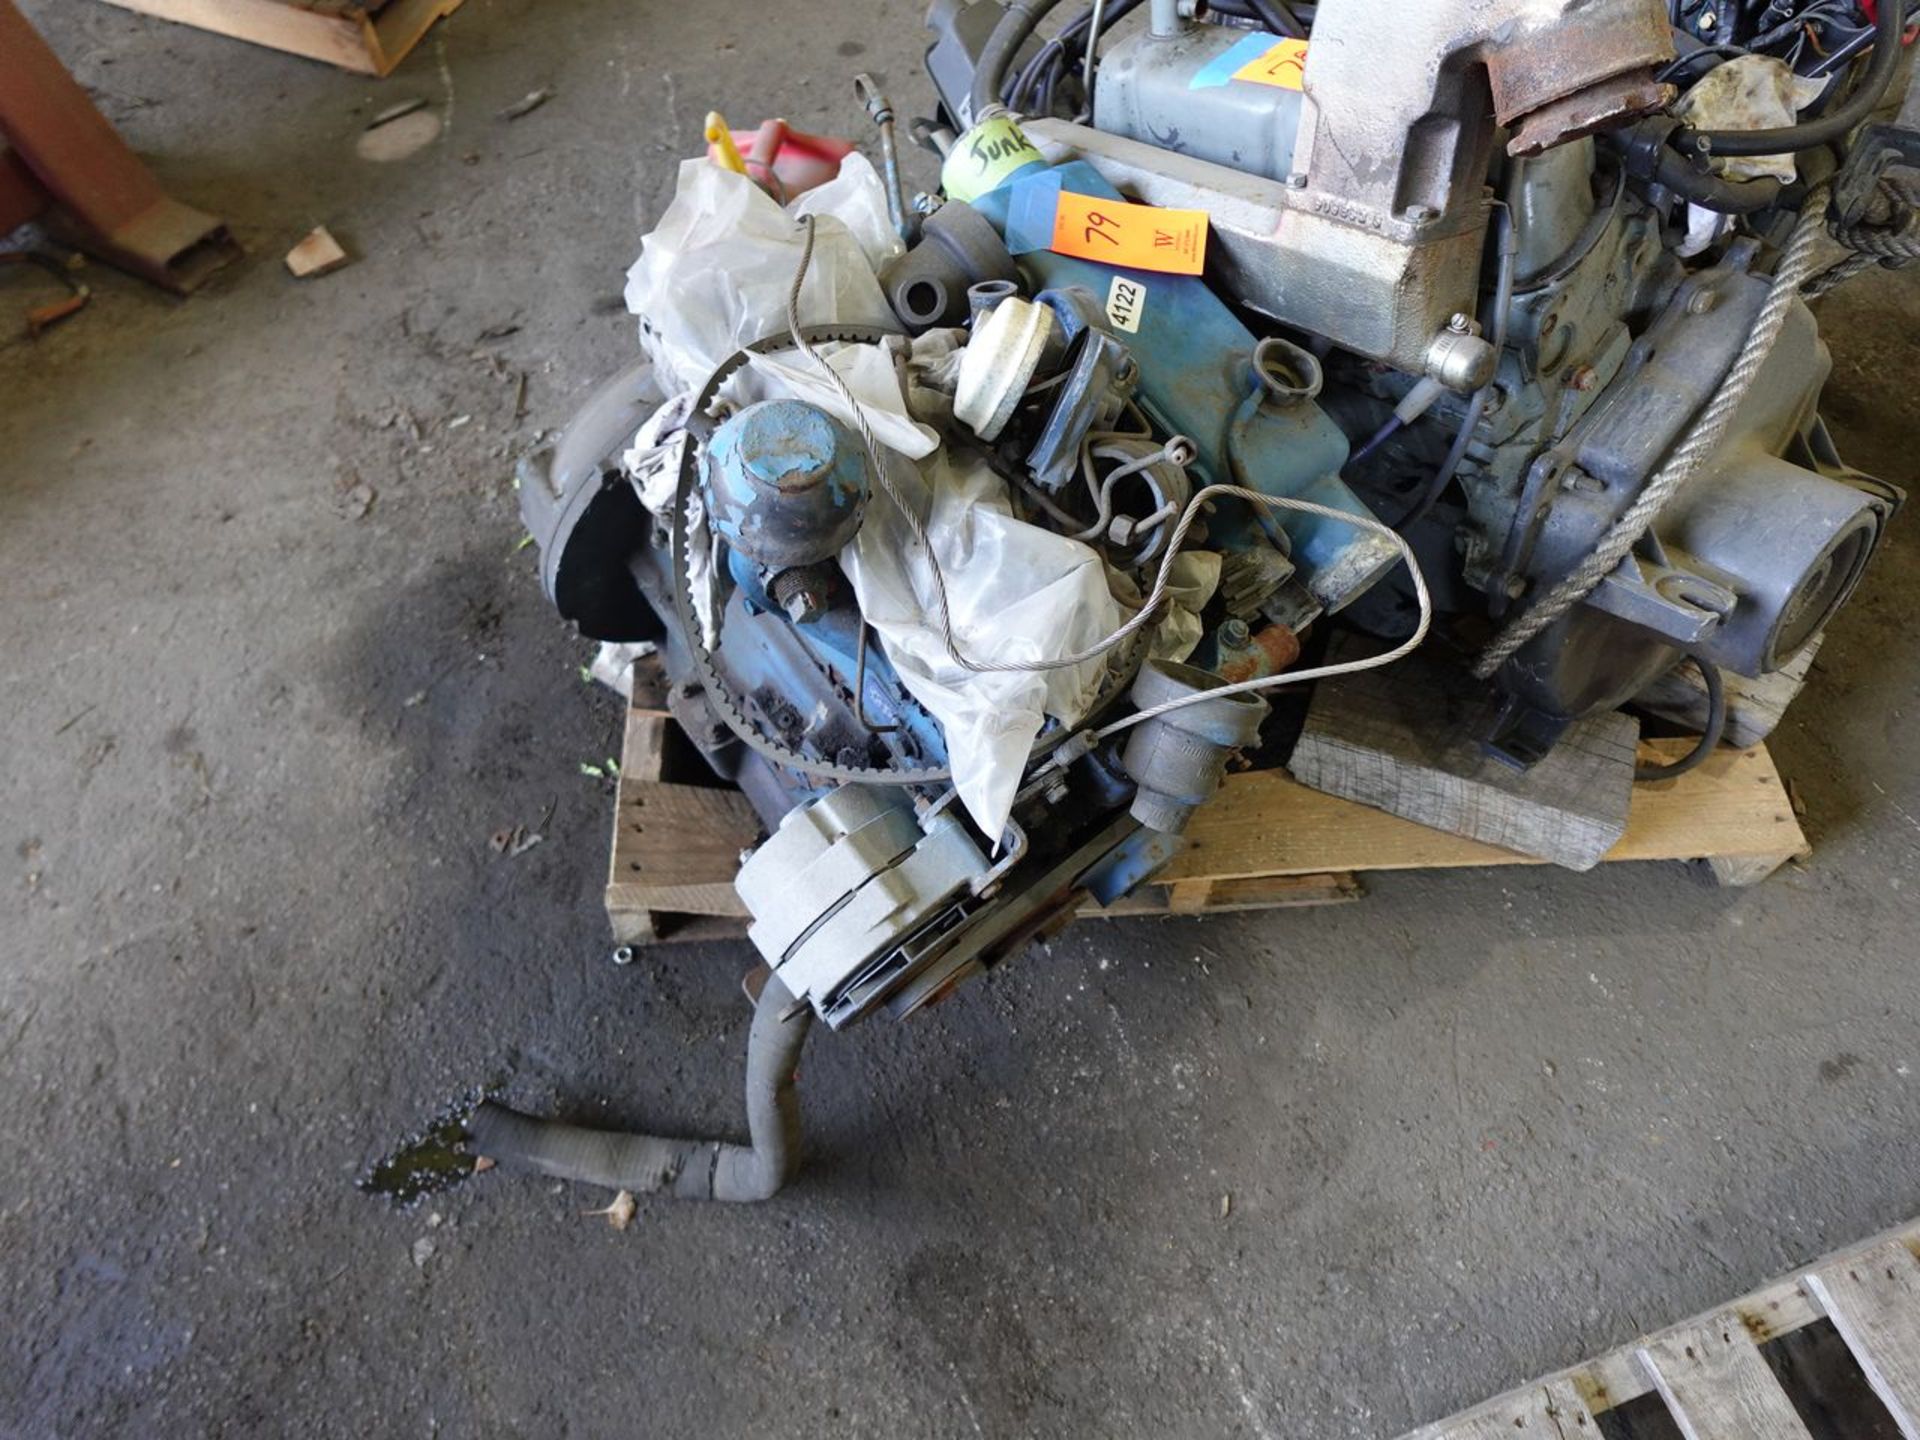 Perkins 4-108 Engine, S/N: N/A; (Client Note: Engine was Locked Up, No Transmission)